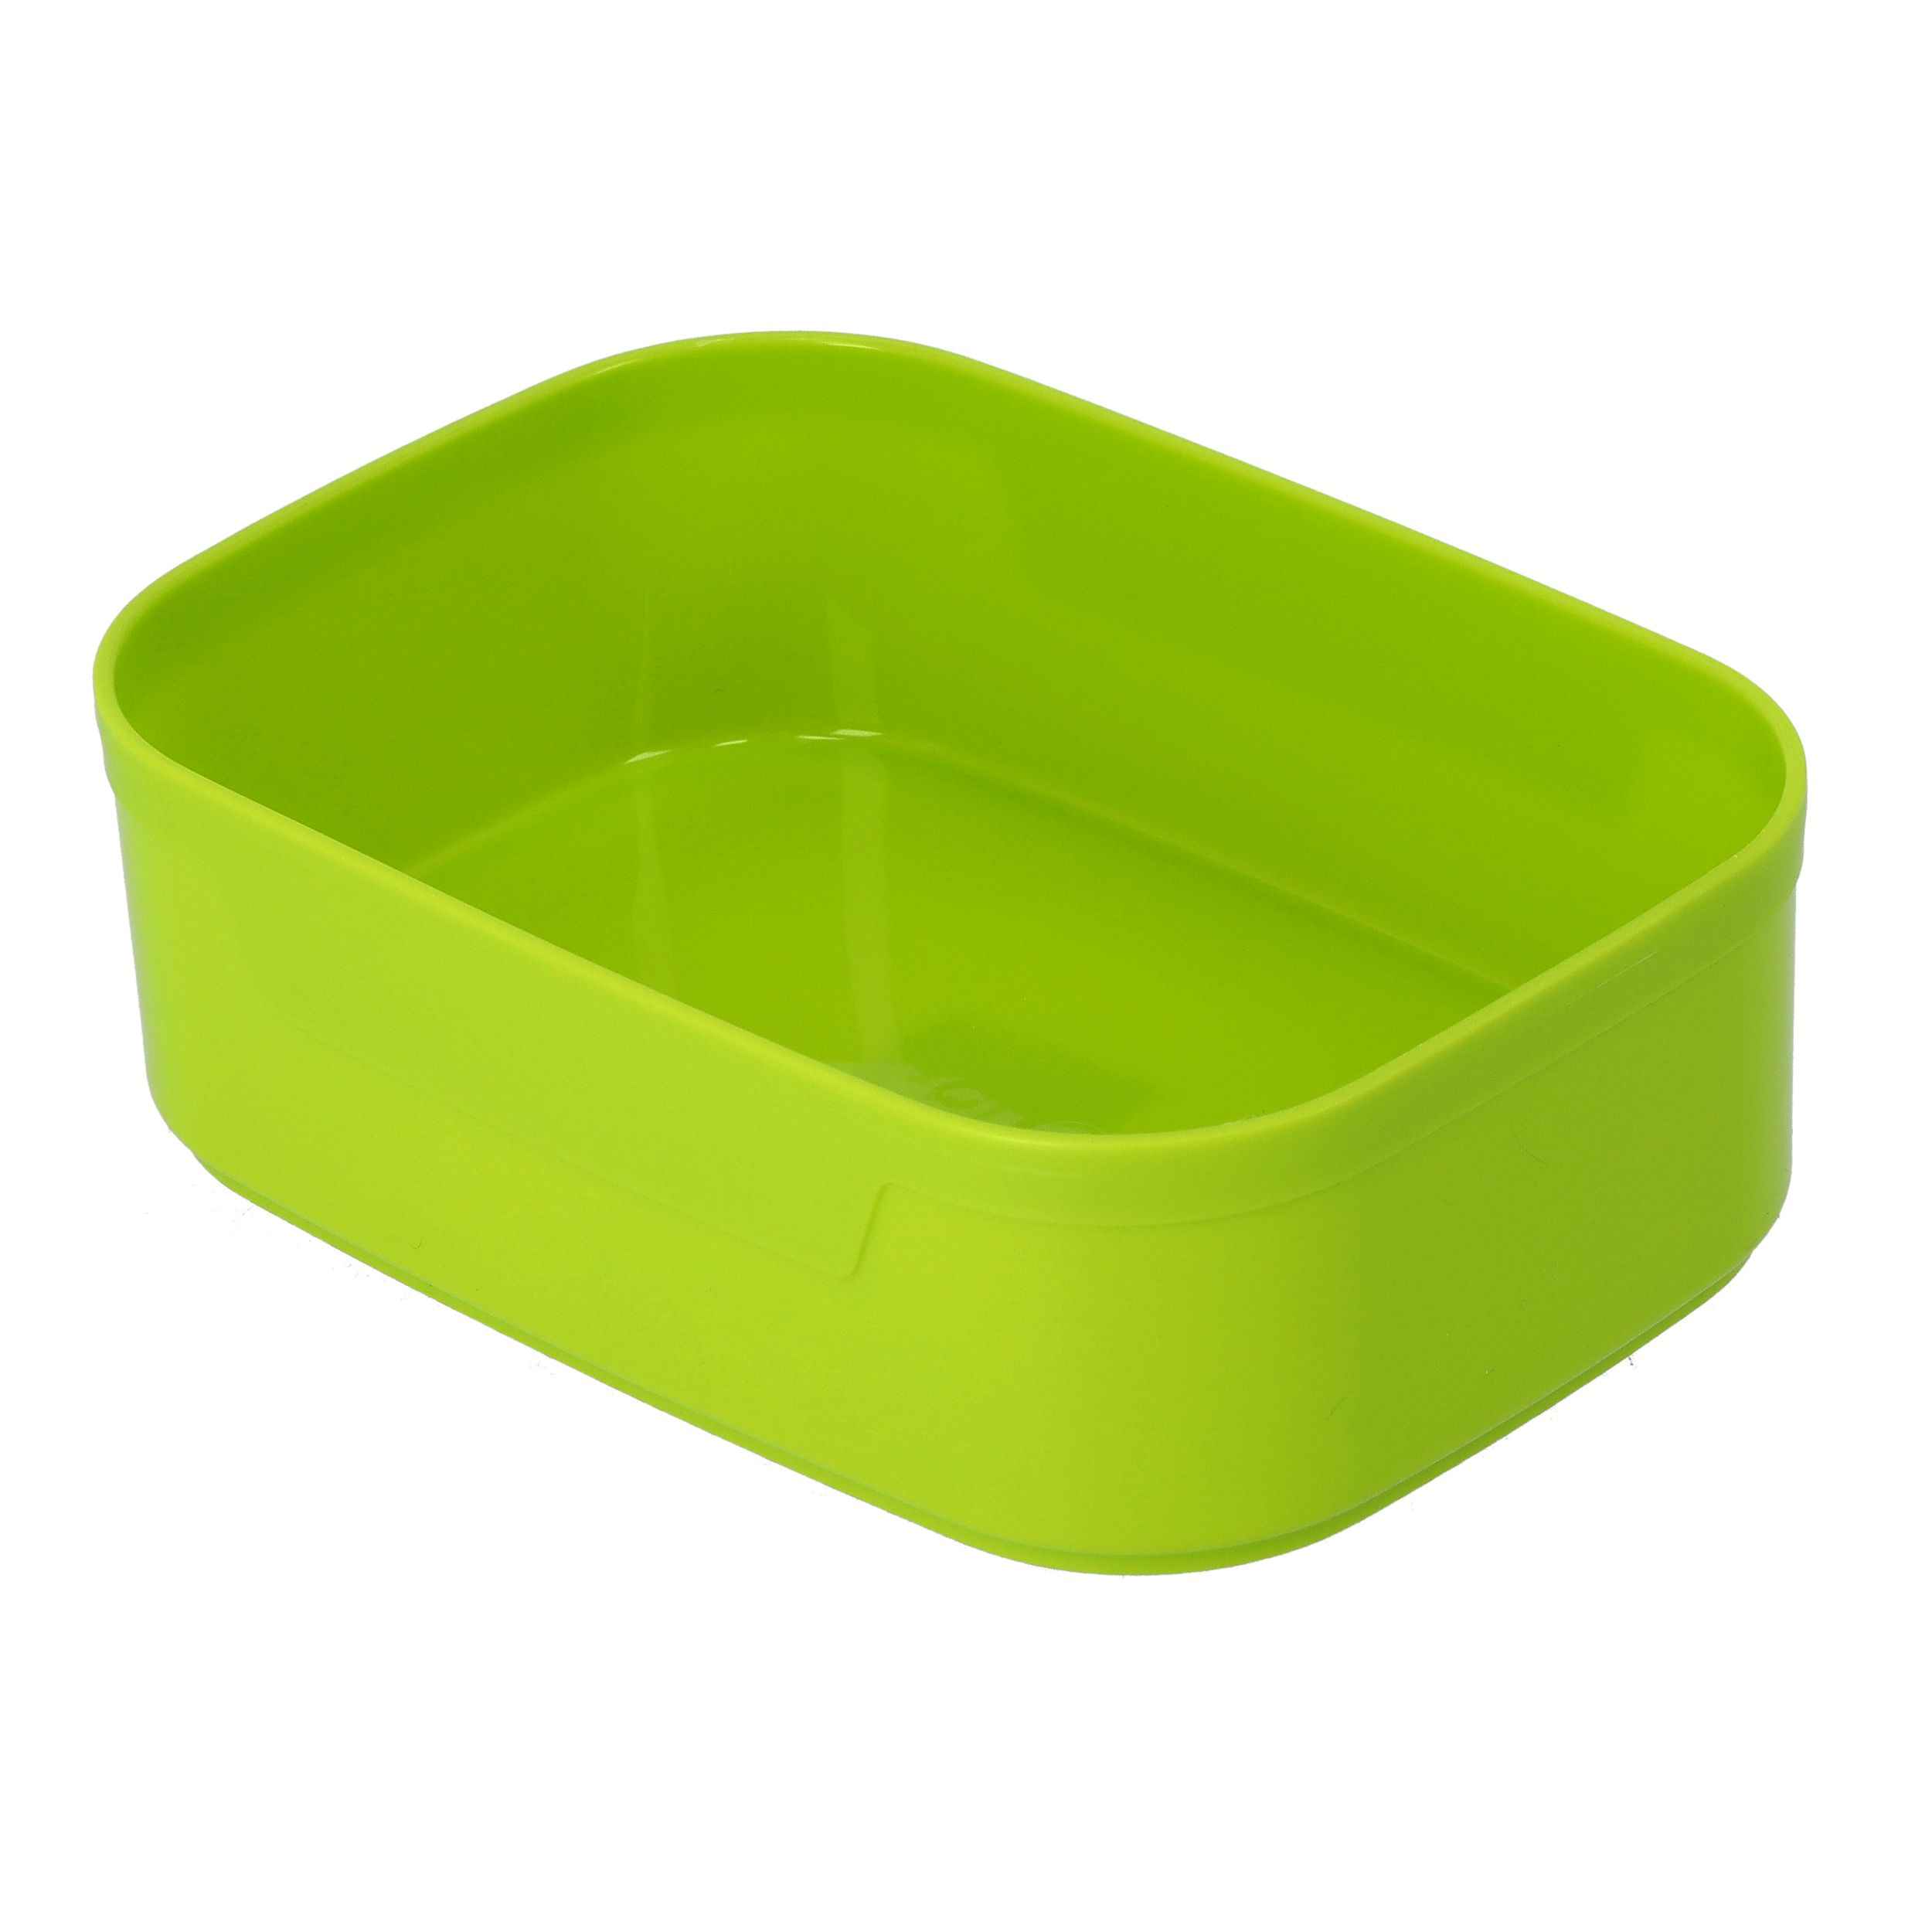 Royalford Rf7222Gr 790 Ml Rectangle Food Container - Portable Stainless Steel Stackable Compartment Lunch, Food Container, Leak-Proof | Microwave & Dishwasher | Ideal For Office, School & More